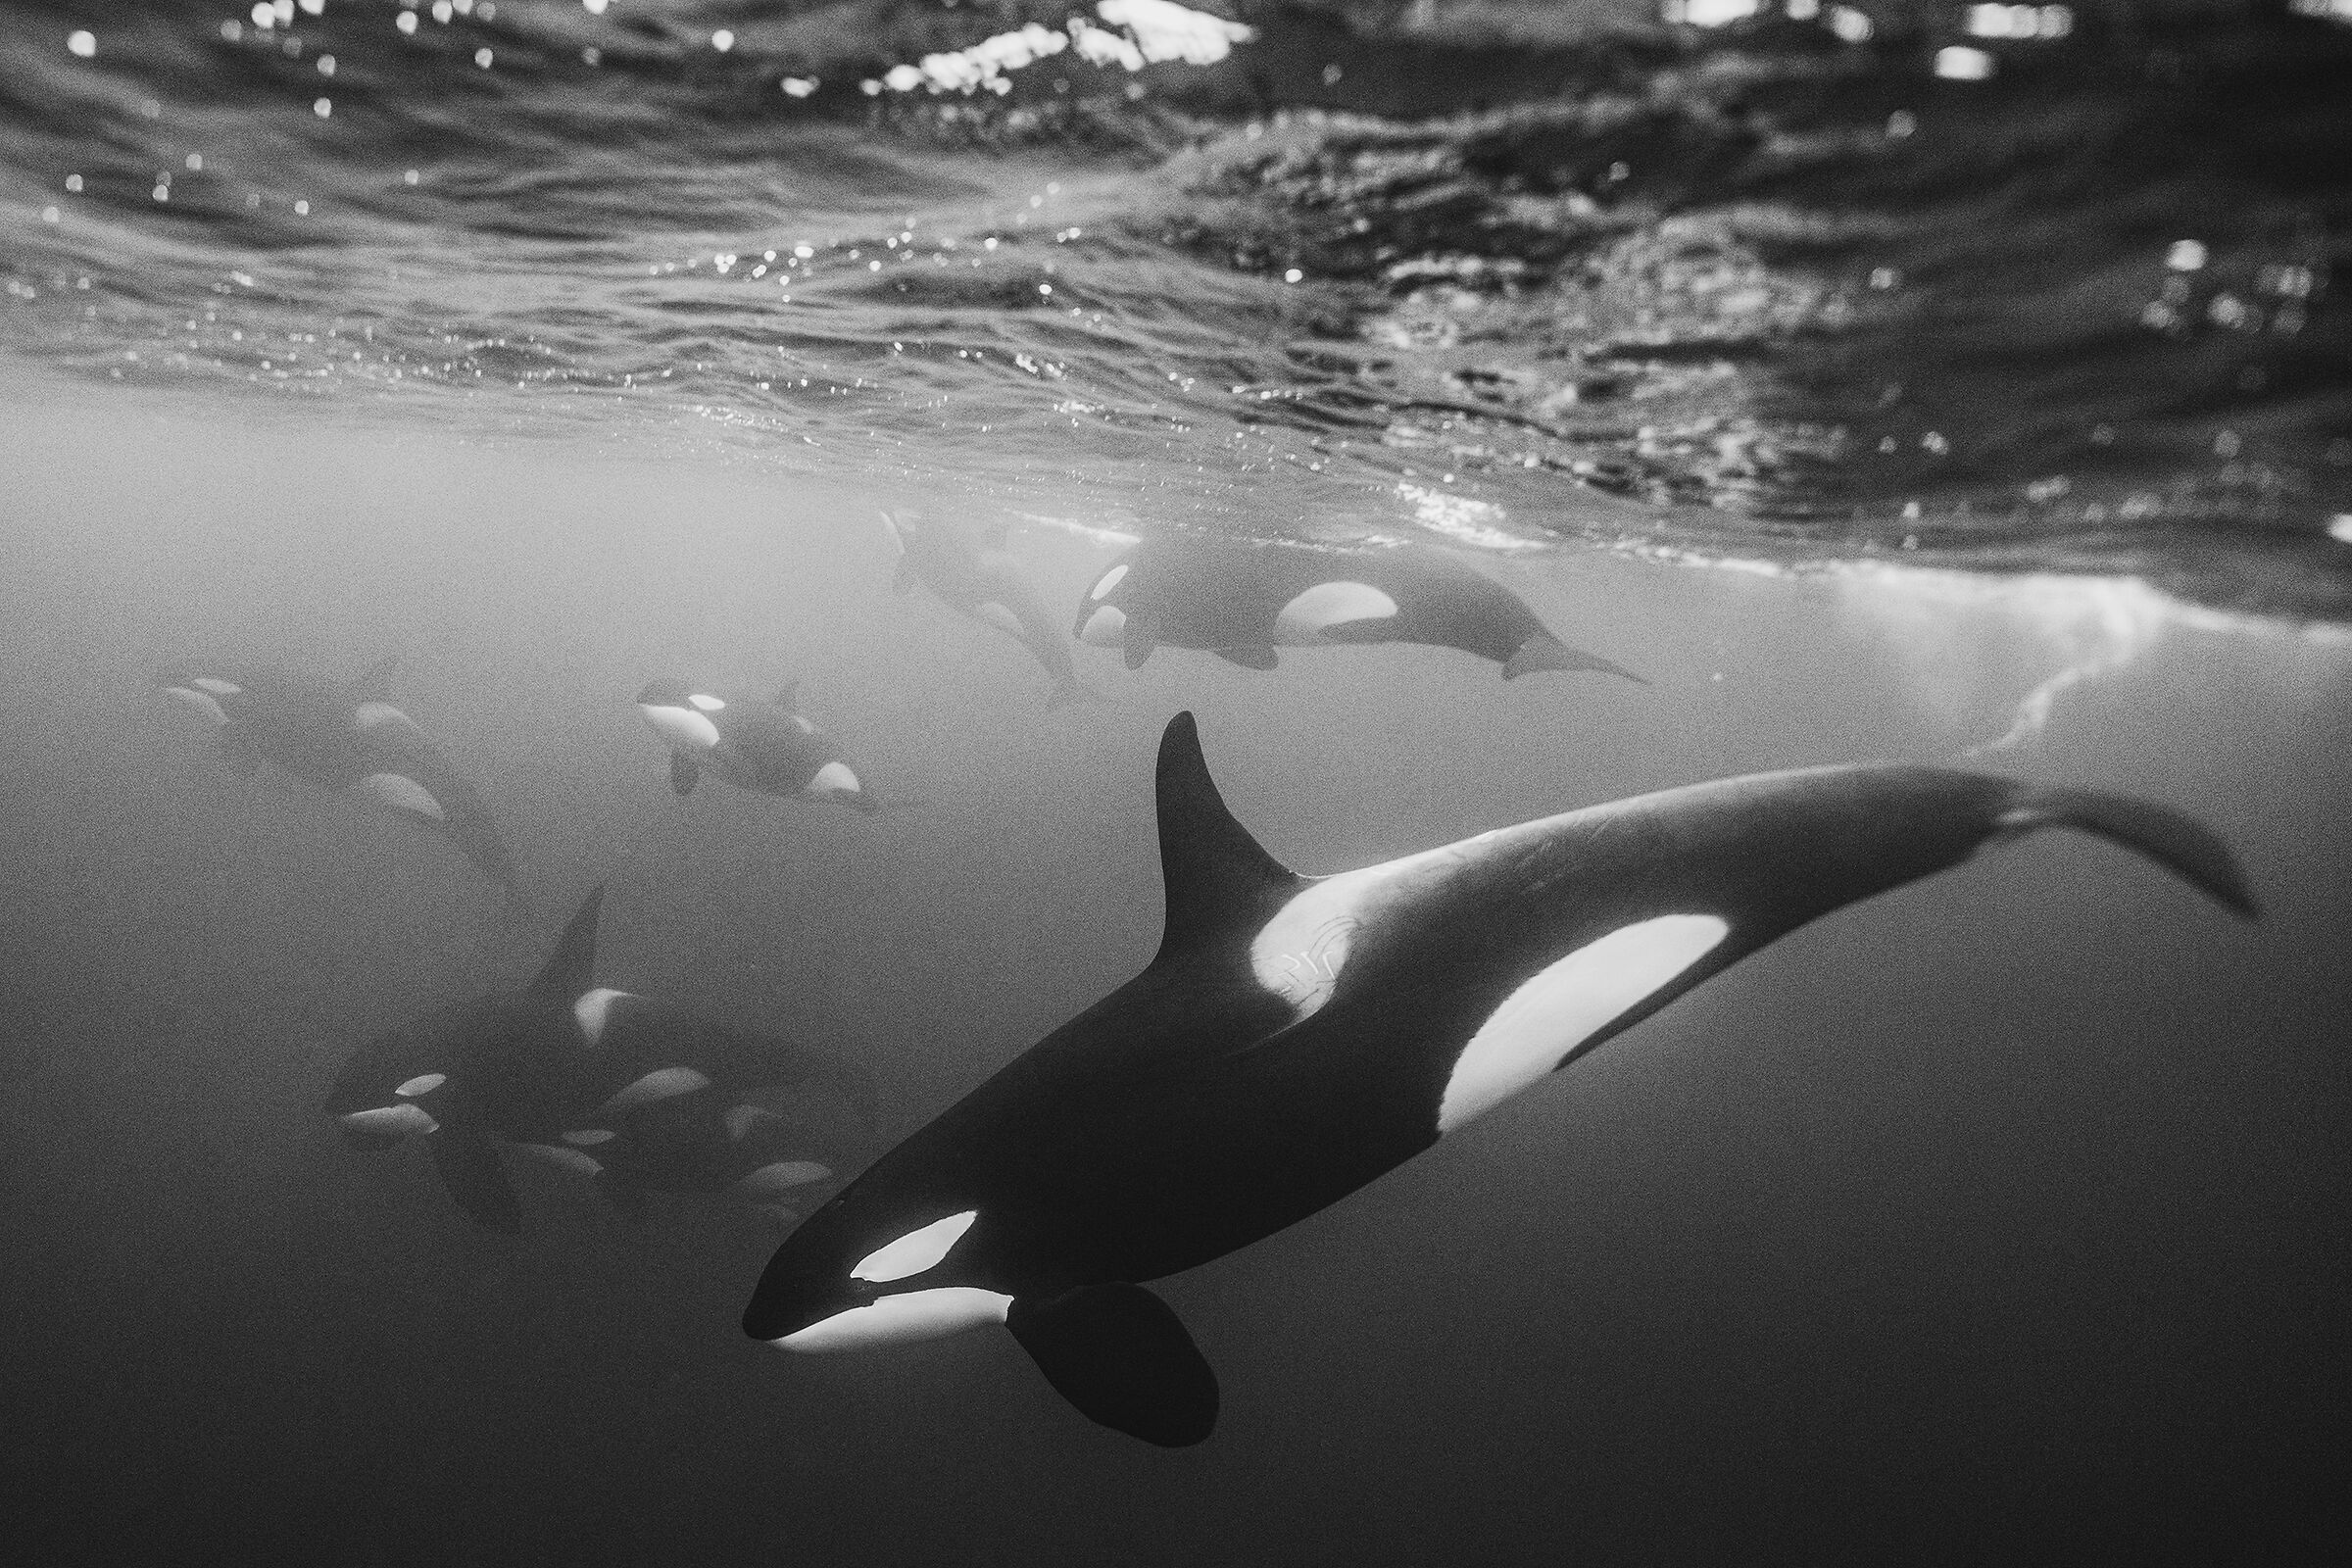 Killer whales in search of herring ...